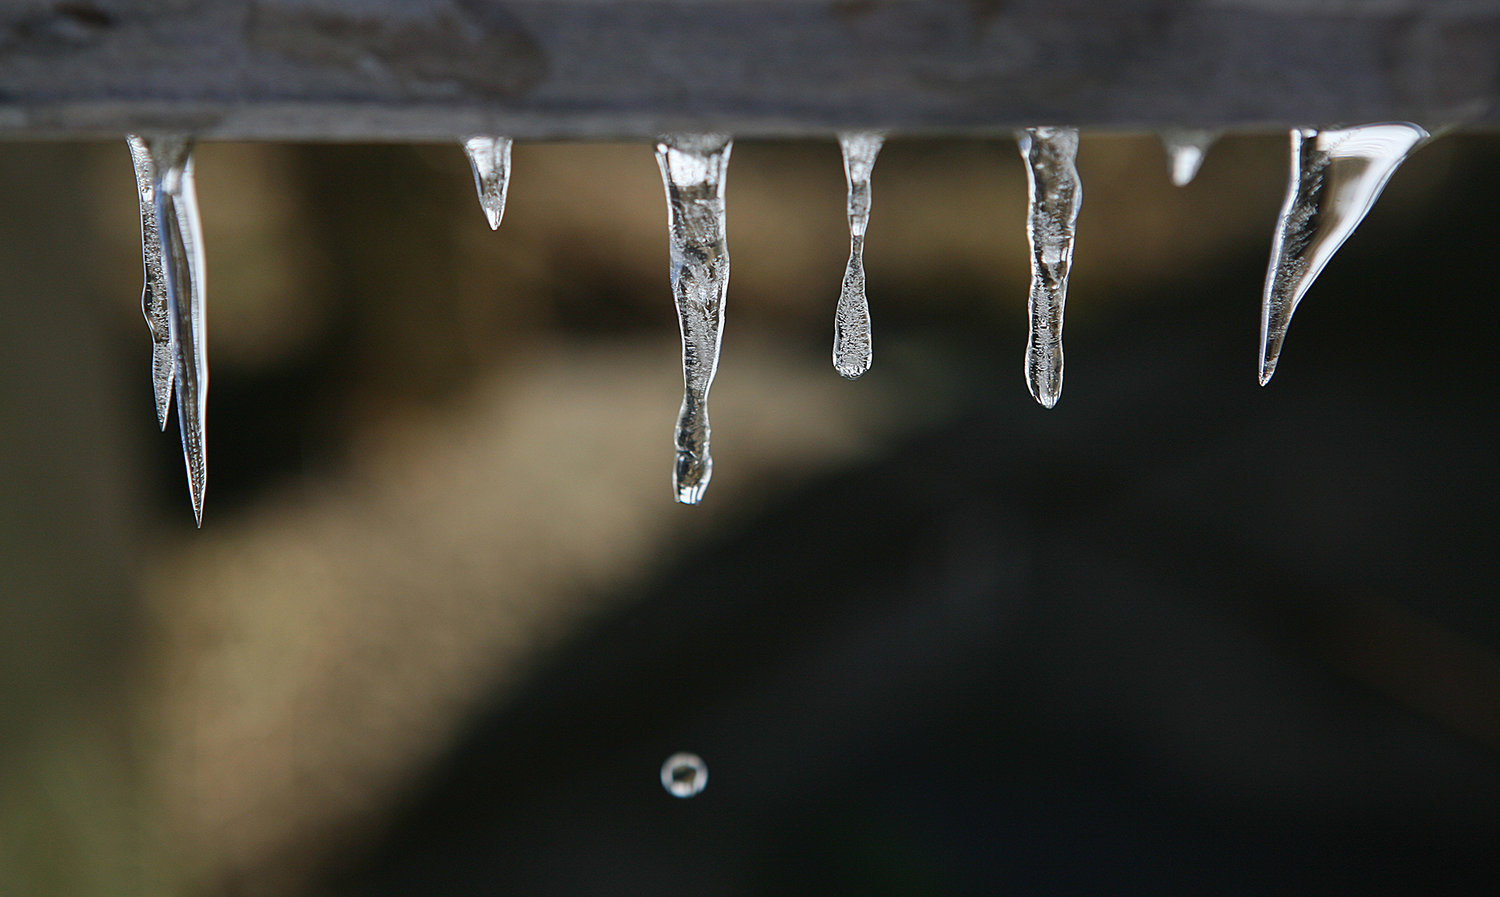 MONDAY, FEBRUARY 8, 2021 -- Water drips from an icicle on Monday. Photo by Ray K. Saunders